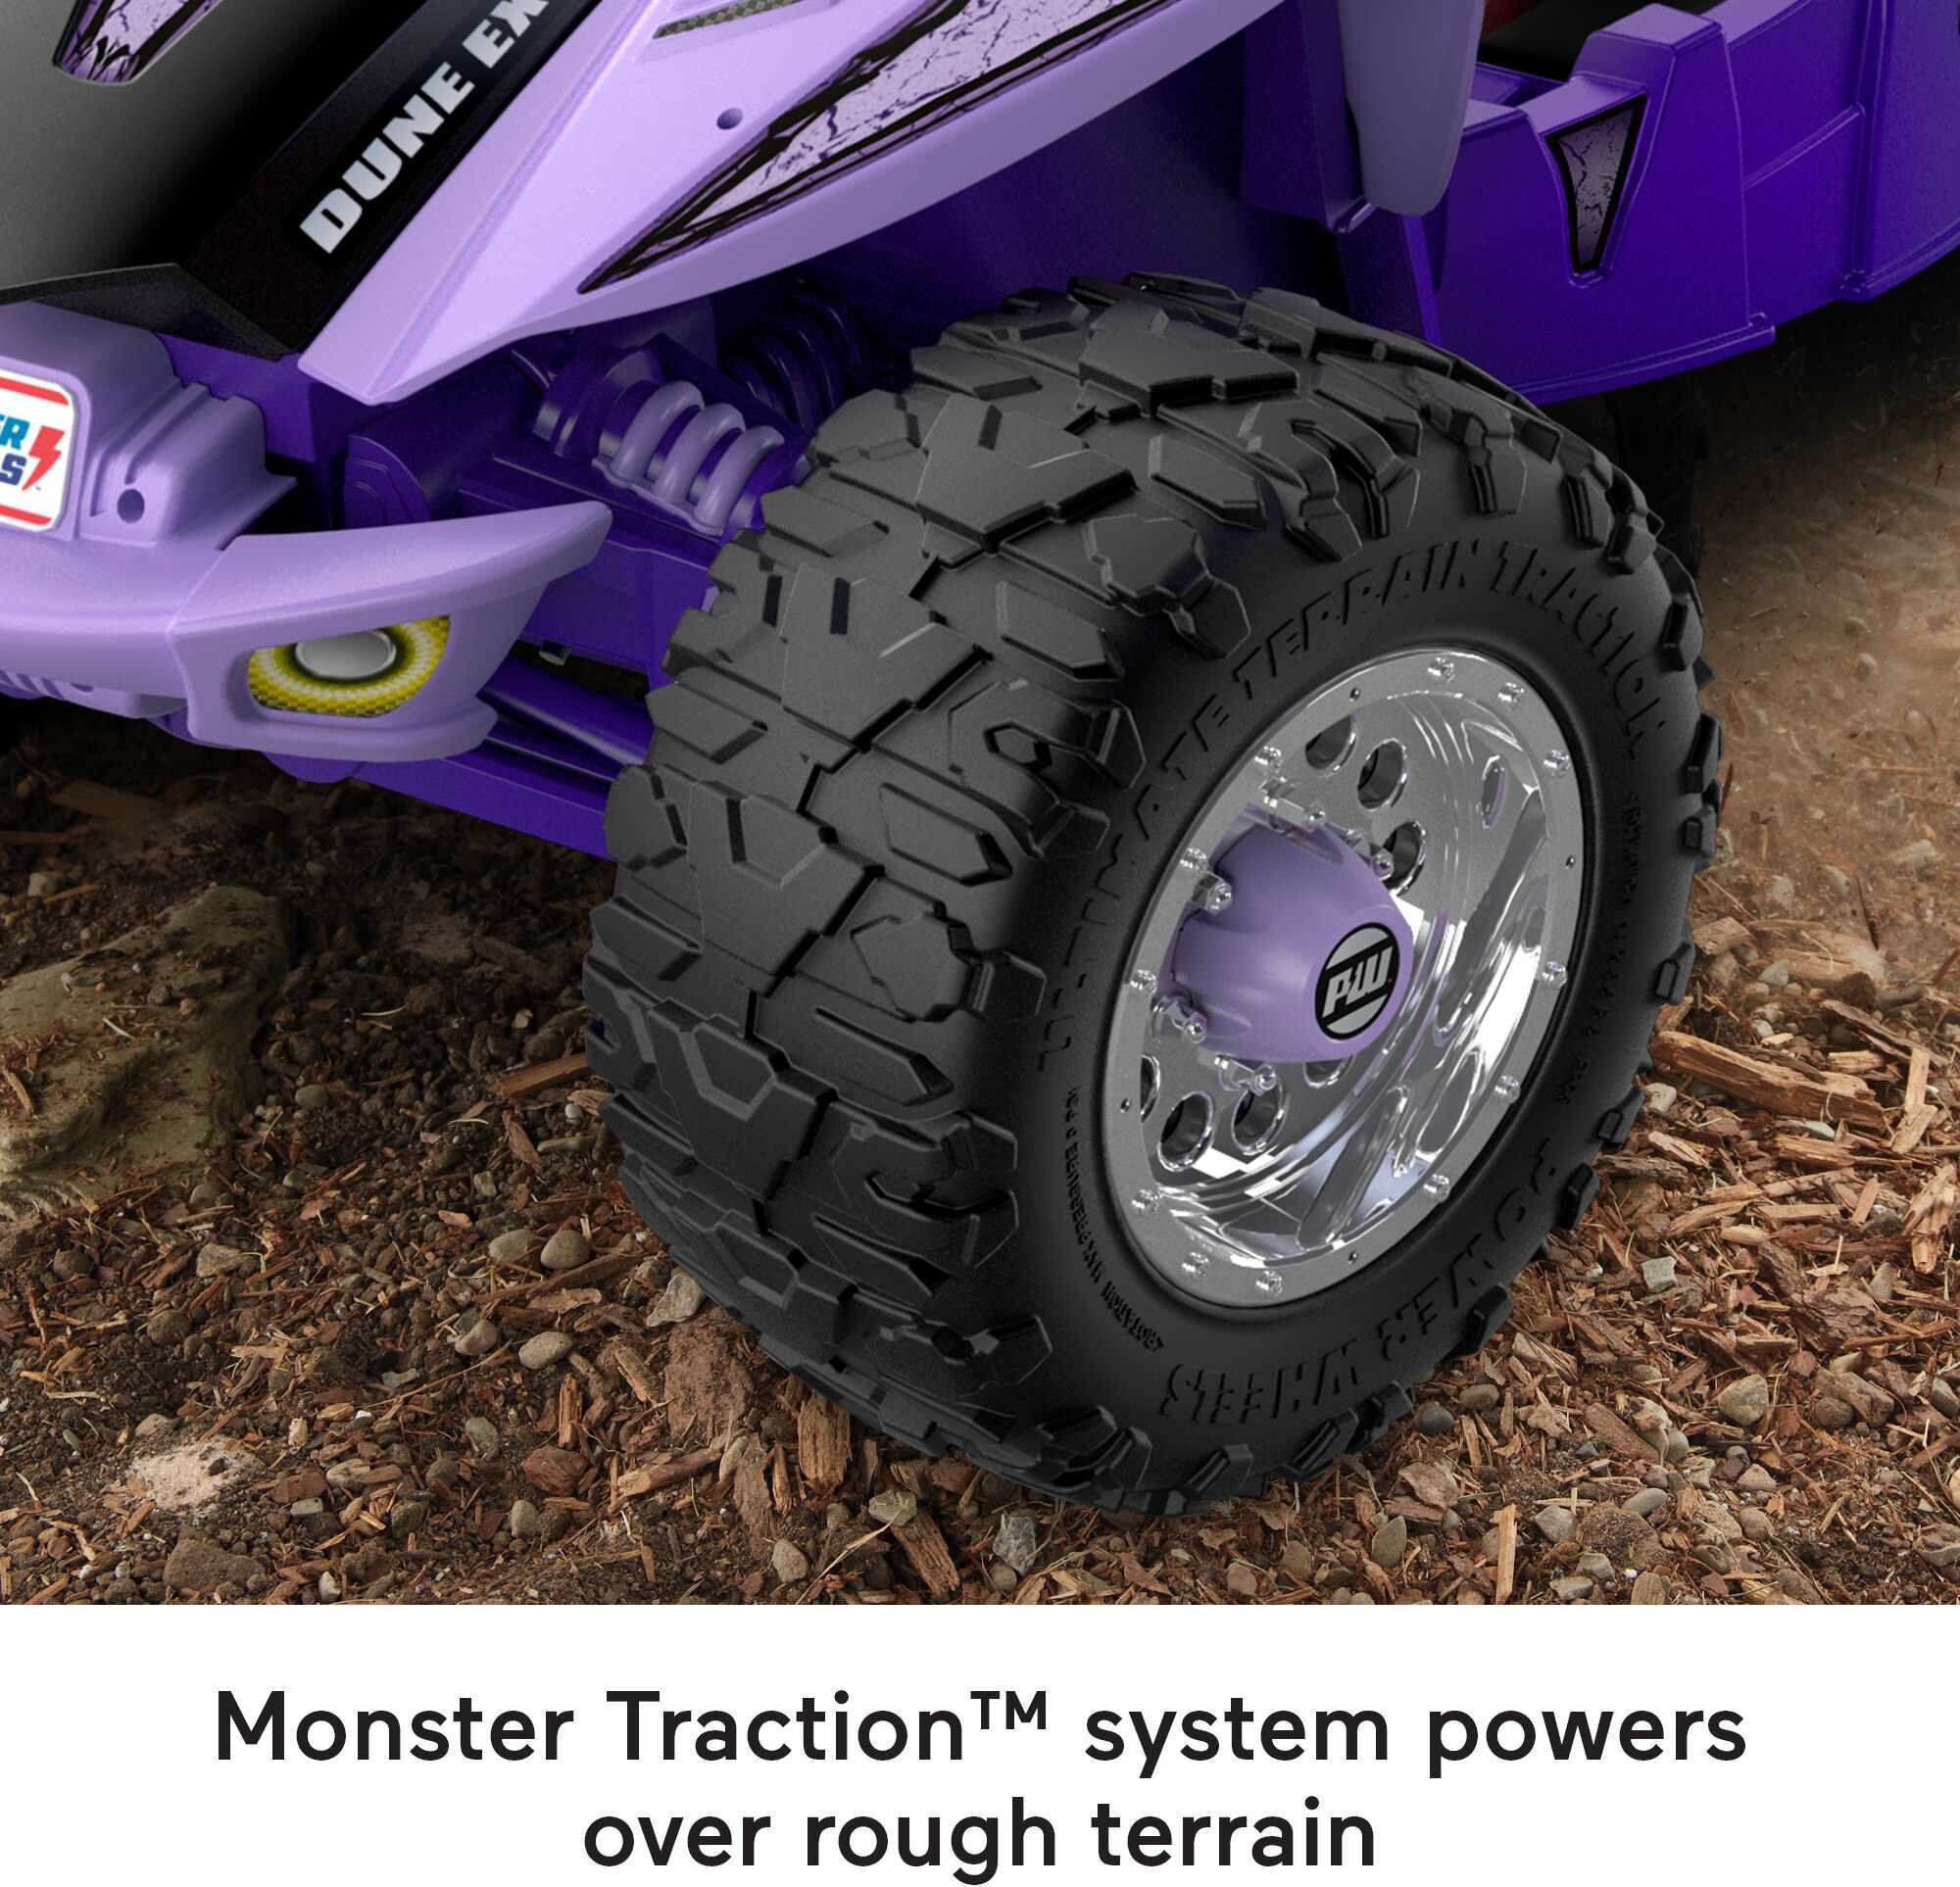 12V Power Wheels Dune Racer Extreme Battery-Powered Ride-on, Purple, for a Child Ages 3-7 - image 4 of 6